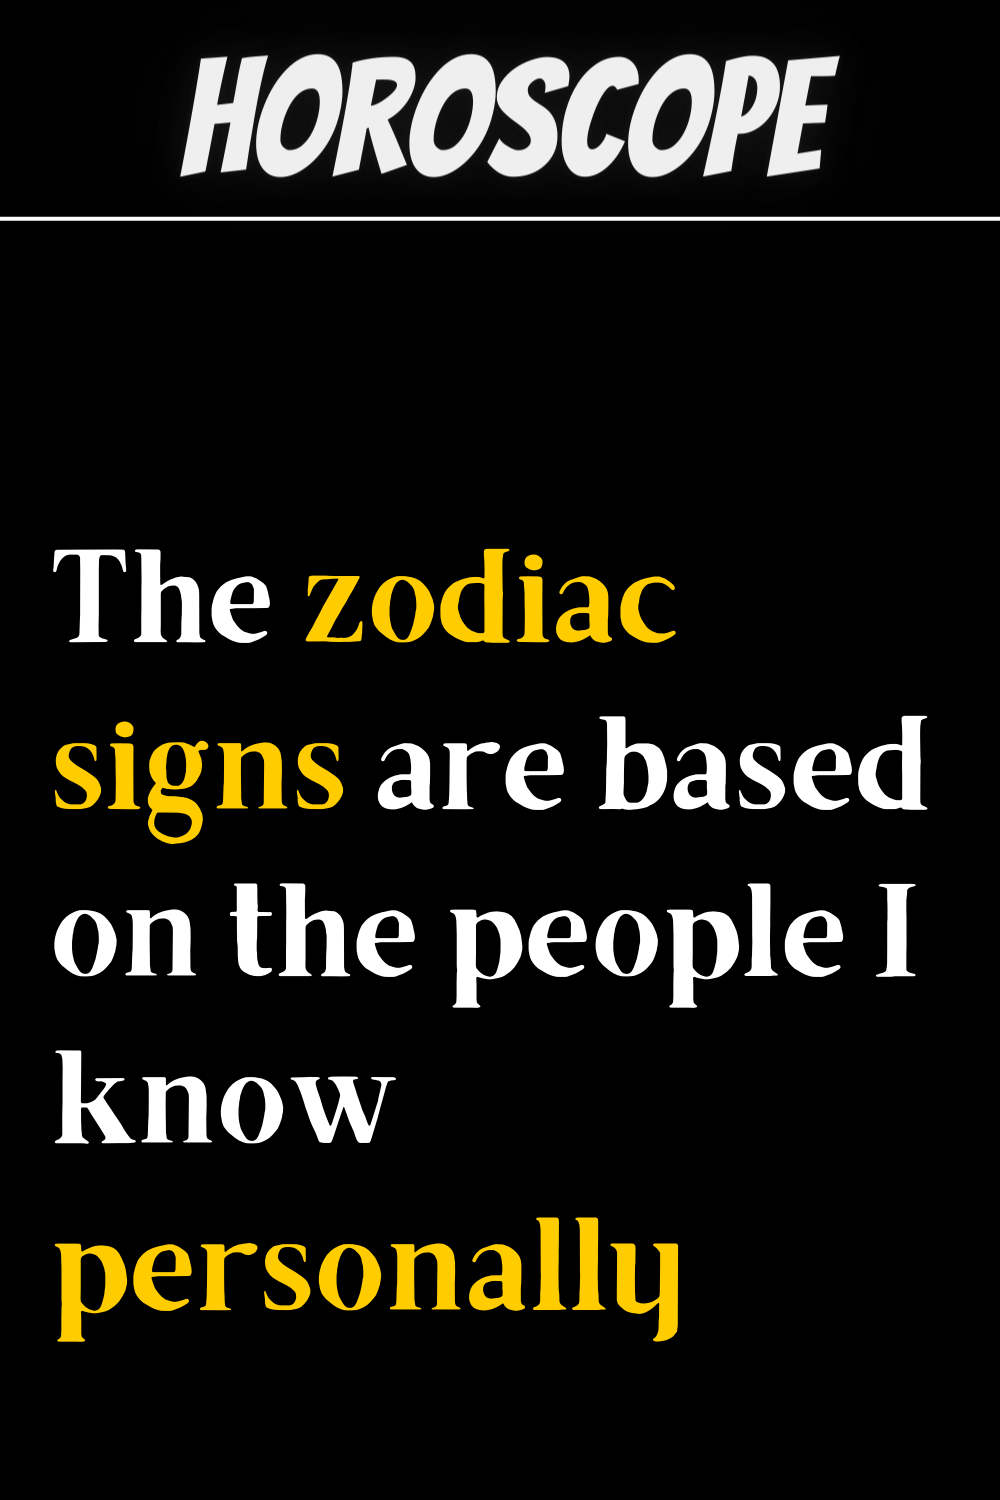 The zodiac signs are based on the people I know personally